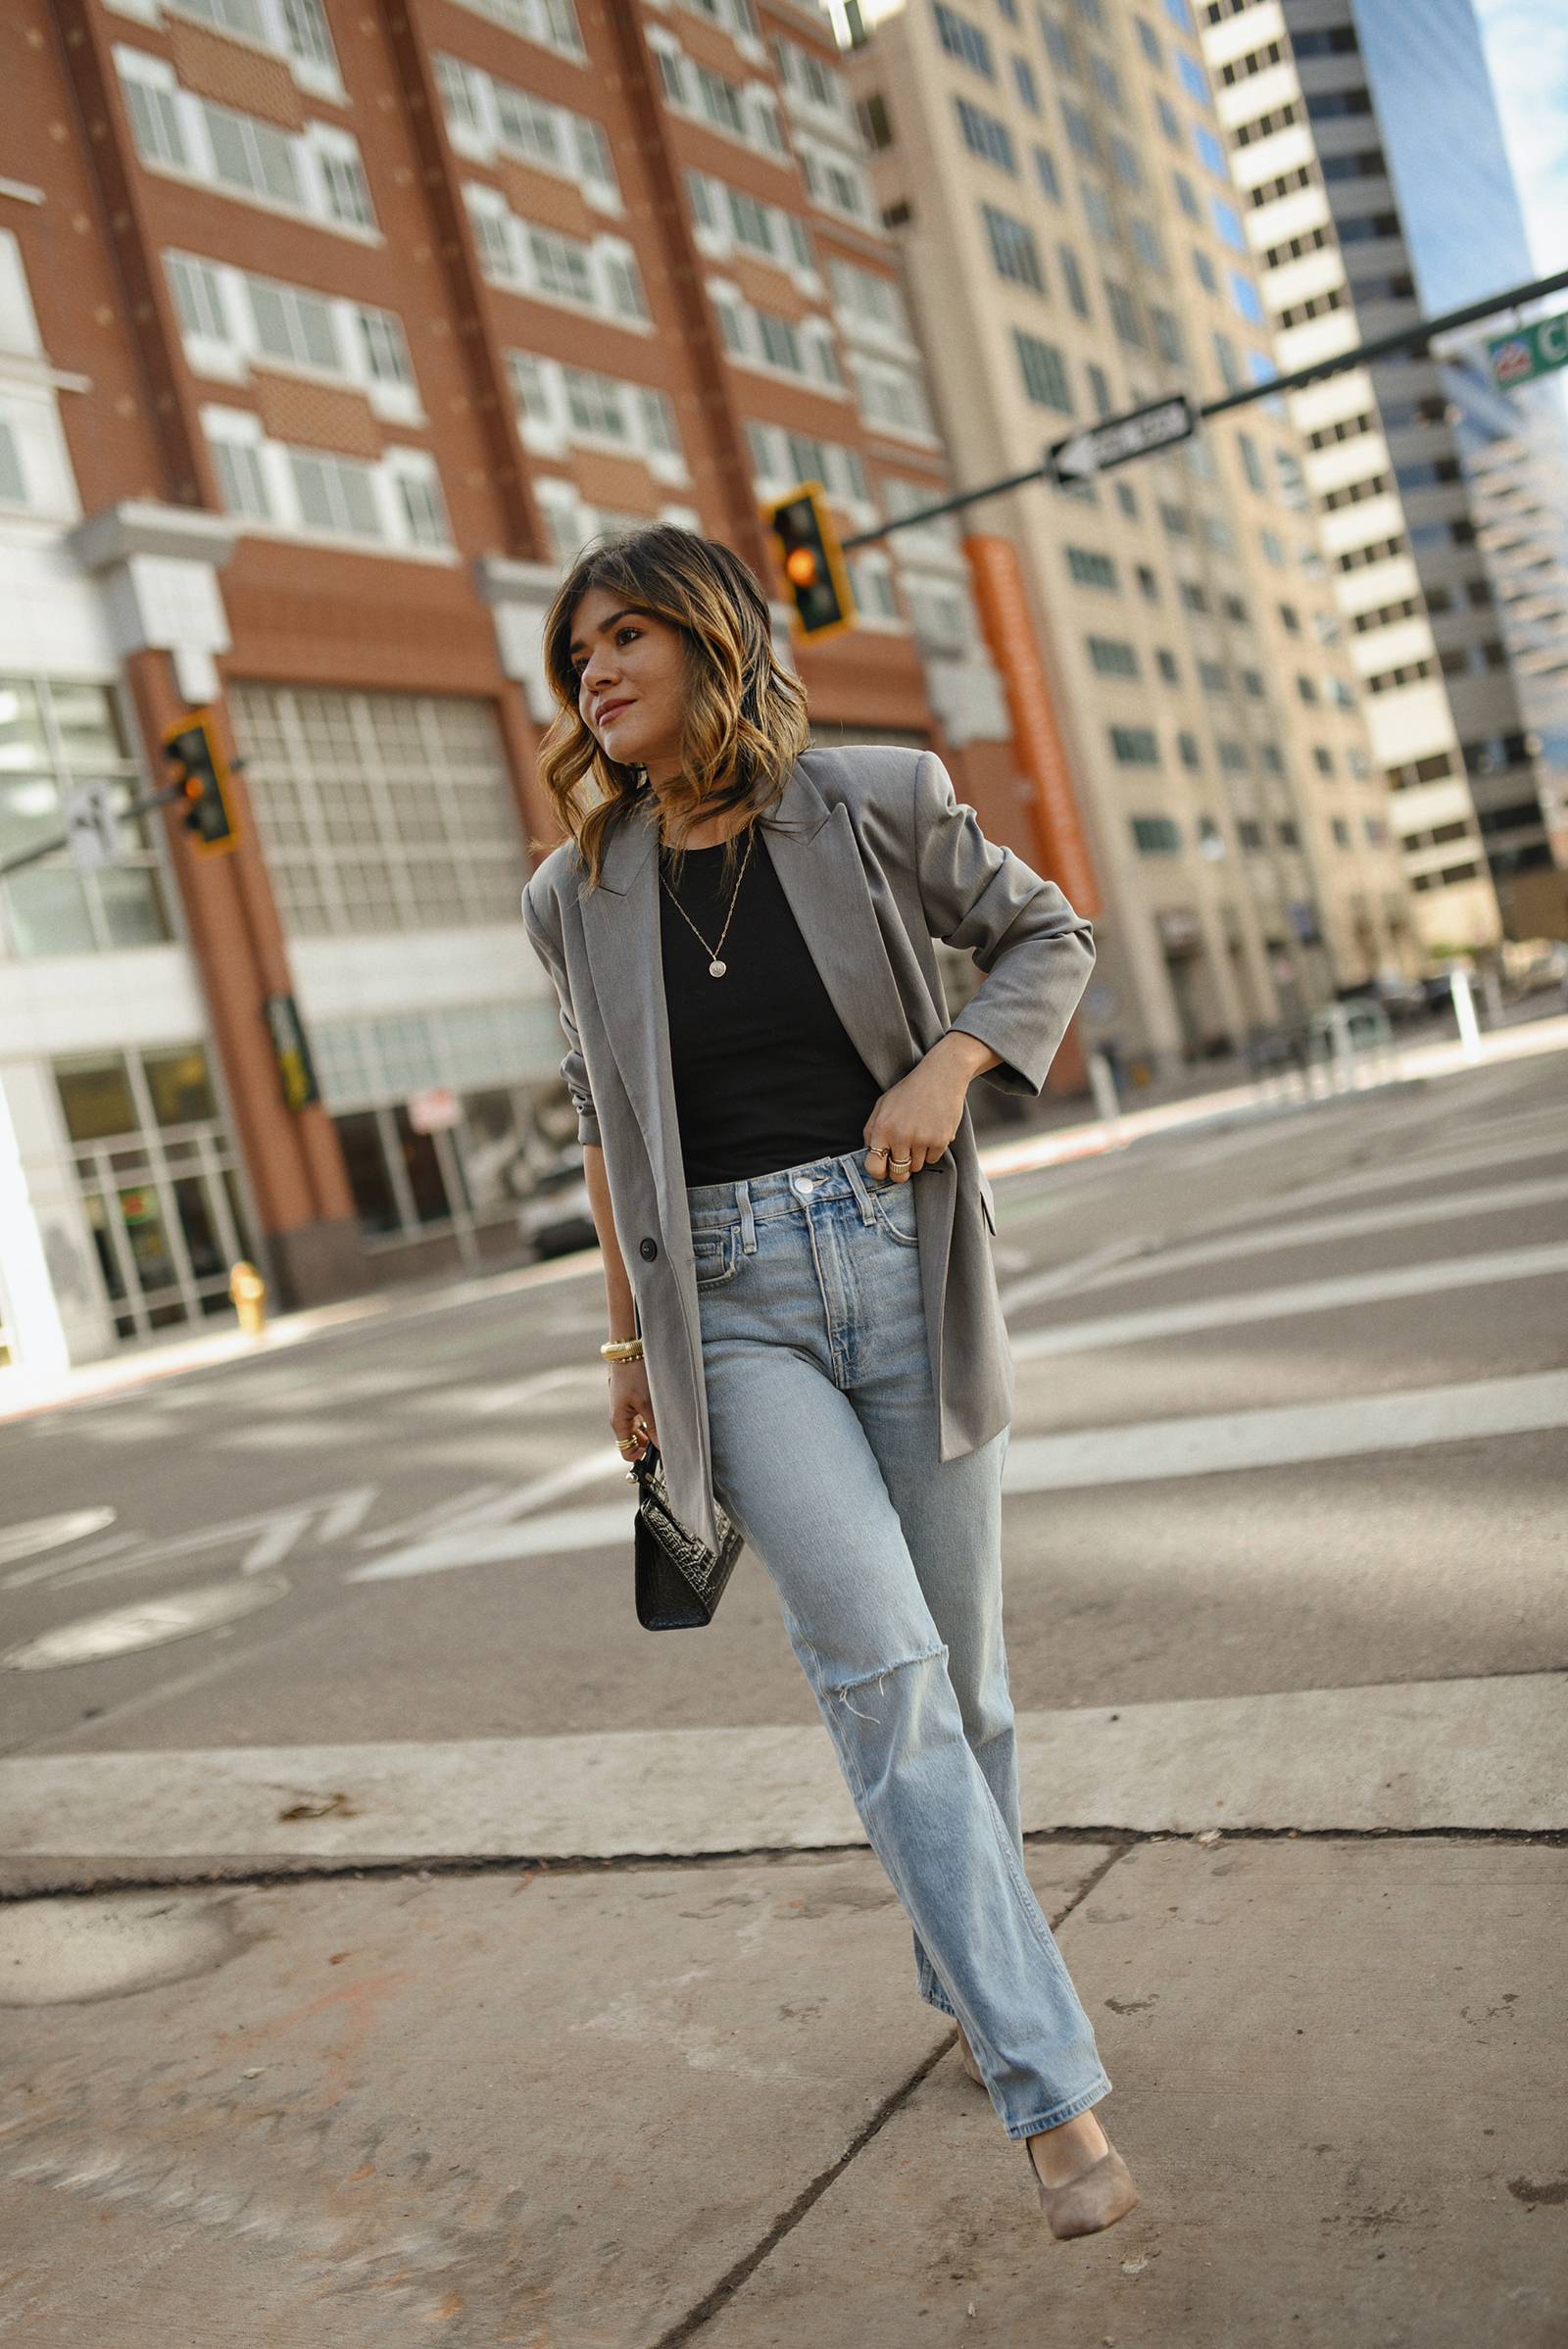 Carolina Hellal of CHIC TALK wearing a Hudson loose jeans and top, a Zara grey blazer, a Strathberry bag and black pumps